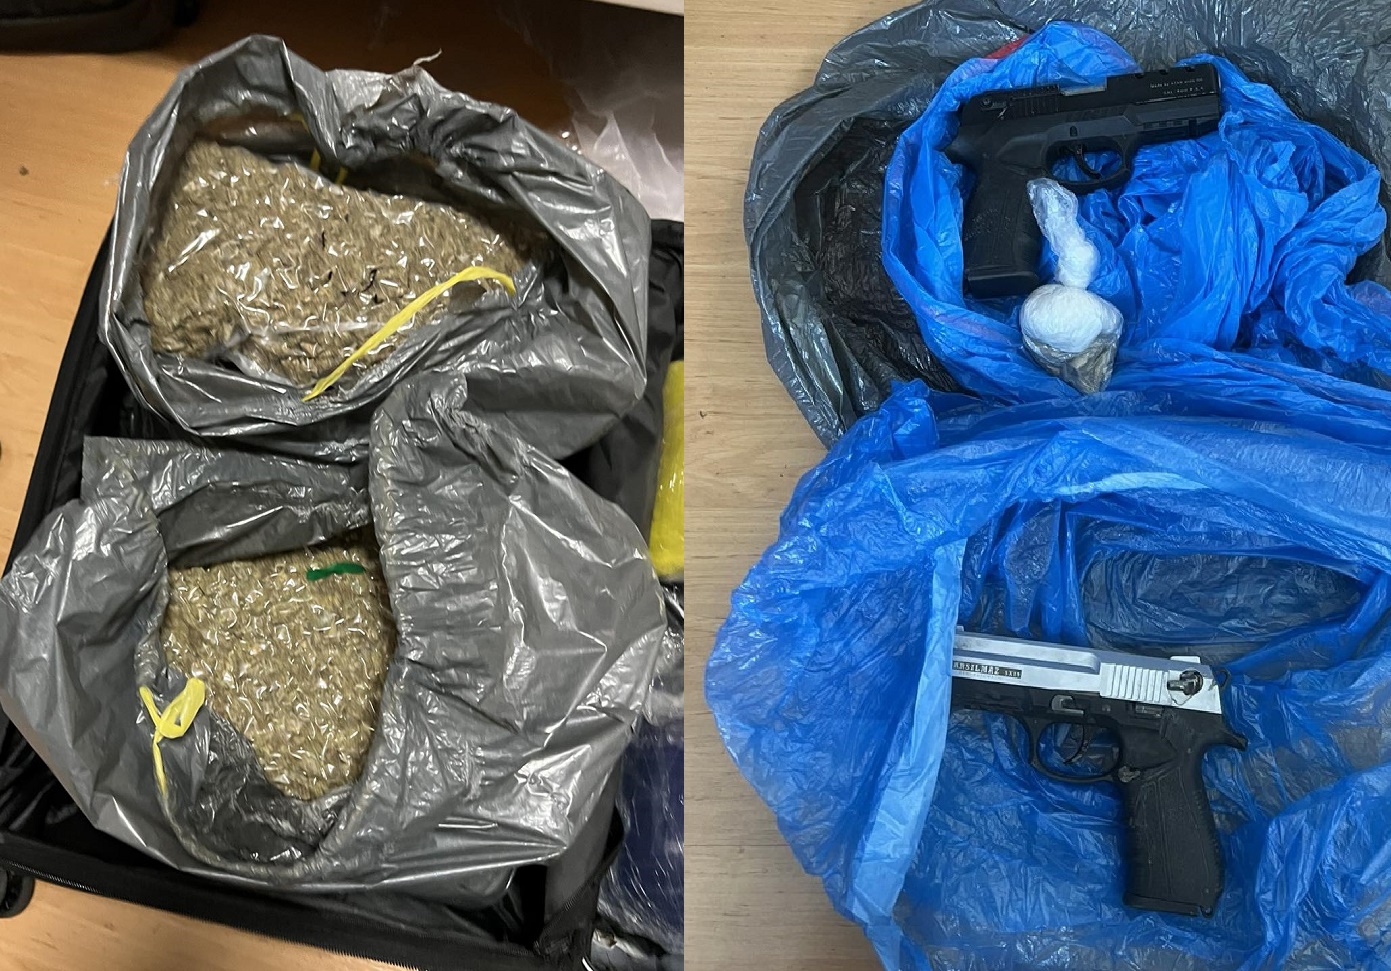 Guns and drug bust – 40kg of cannabis seized in Limassol